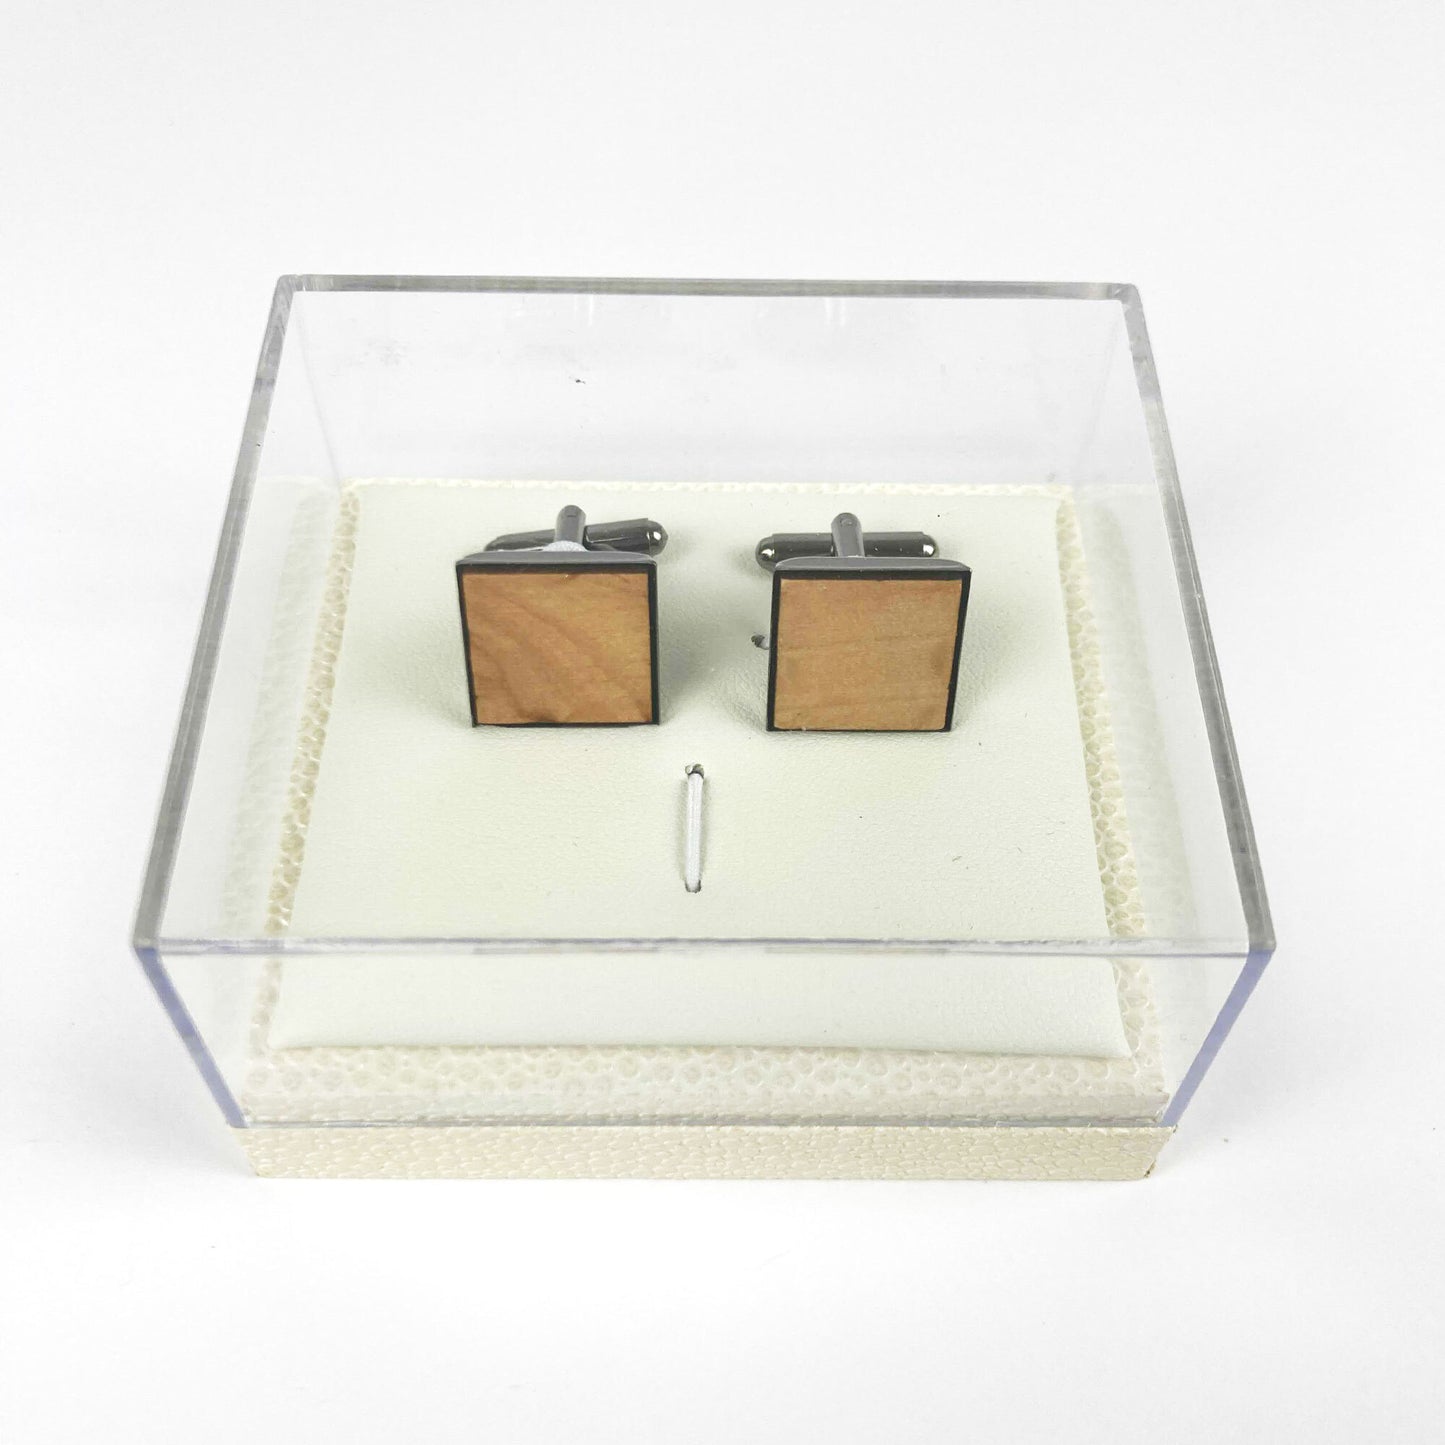 Square Wooden Initials Mens Cufflinks With Git Pouch